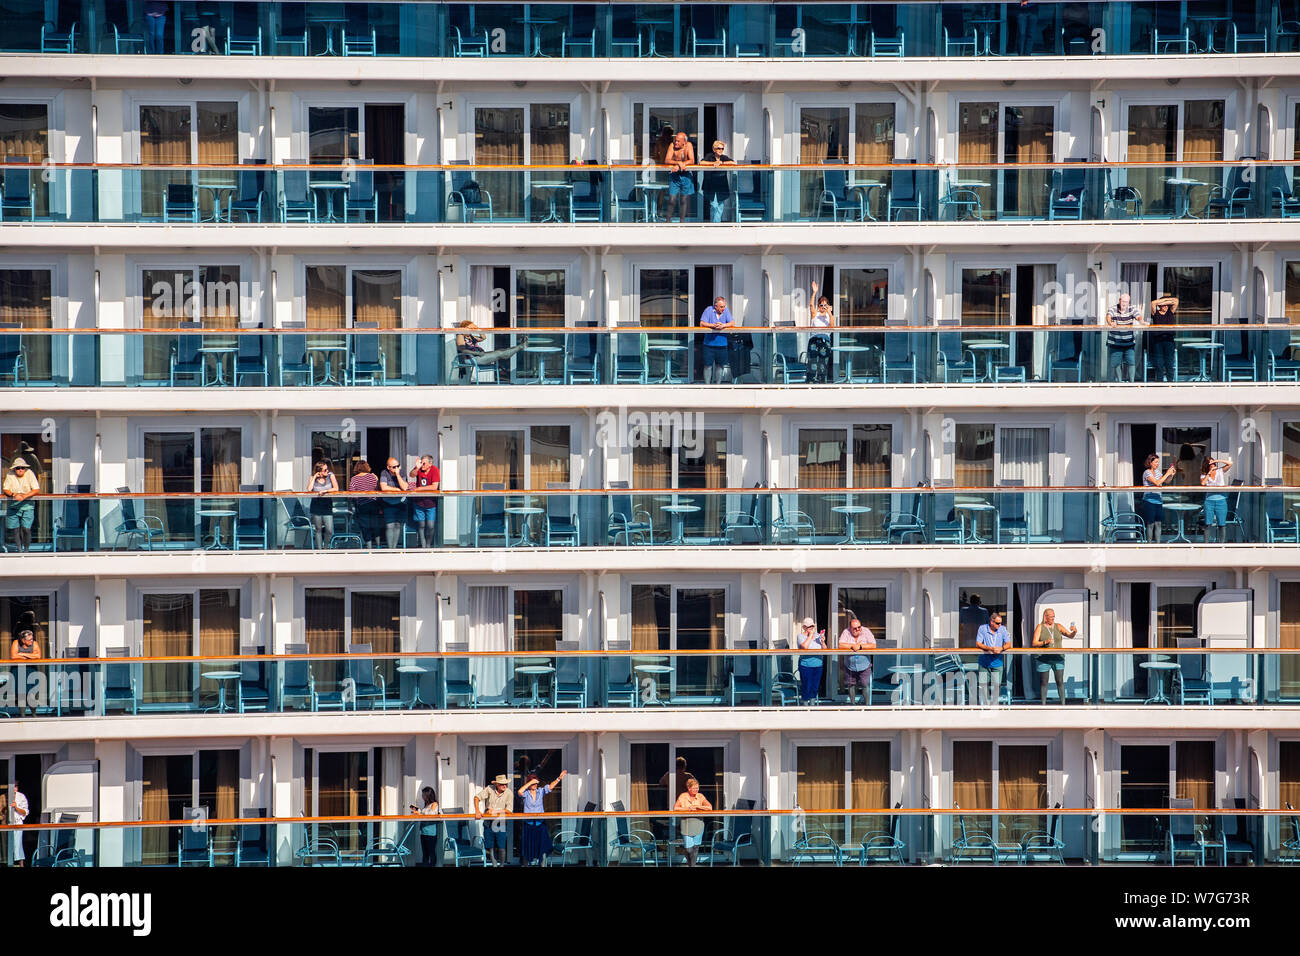 Close up of row upon row of port side Cruise Ship cabin balconies some with passengers at the dock in Tallinn, Estonia on 21 July 2019 Stock Photo